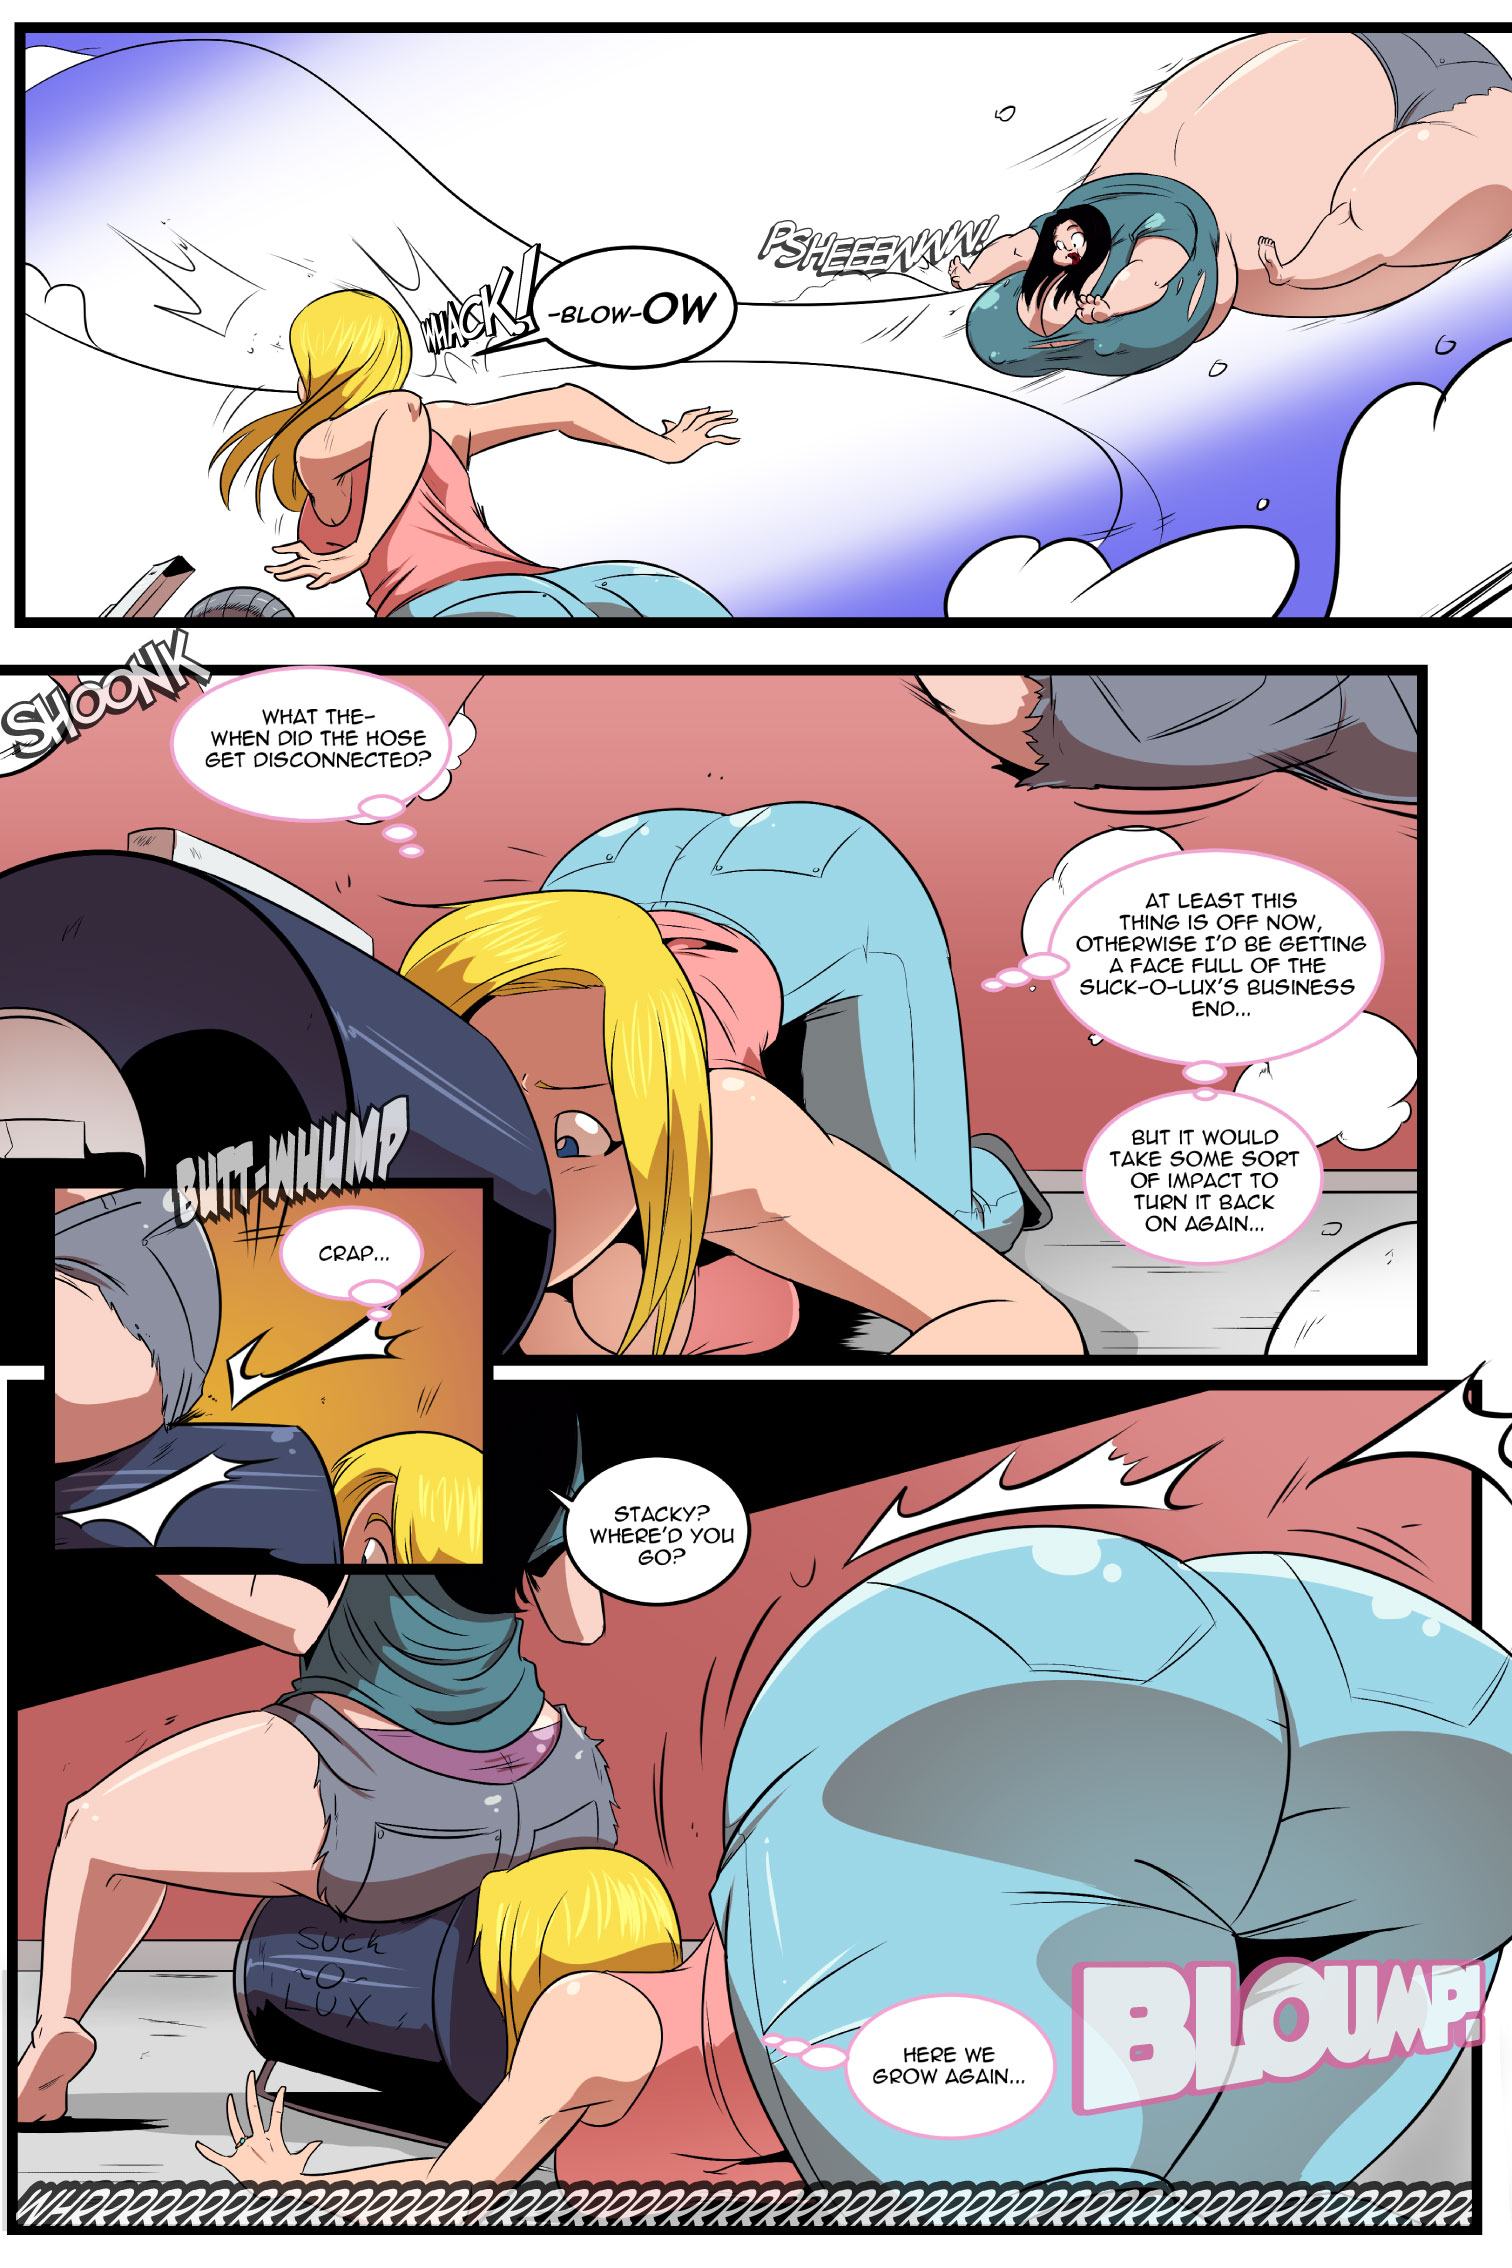 5：borrowed_and_blimped_5_by_lakehylia_d9mj6ph.jpg